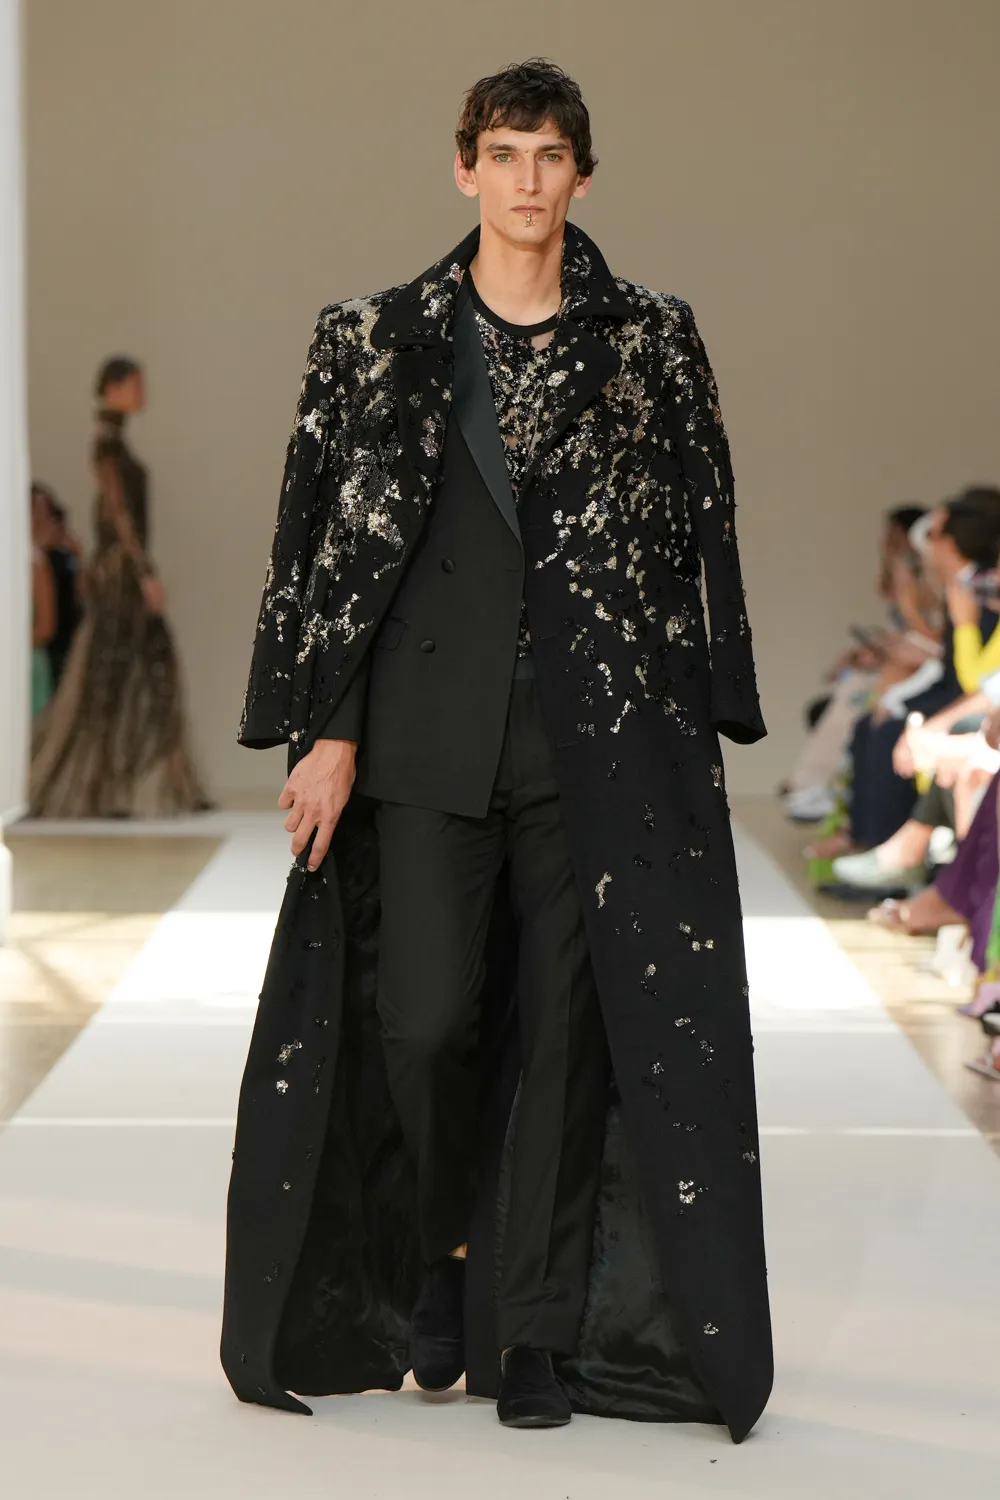 Elie Saab Put His Signature Sparkle on Couture for Men – Fashion Bomb Daily